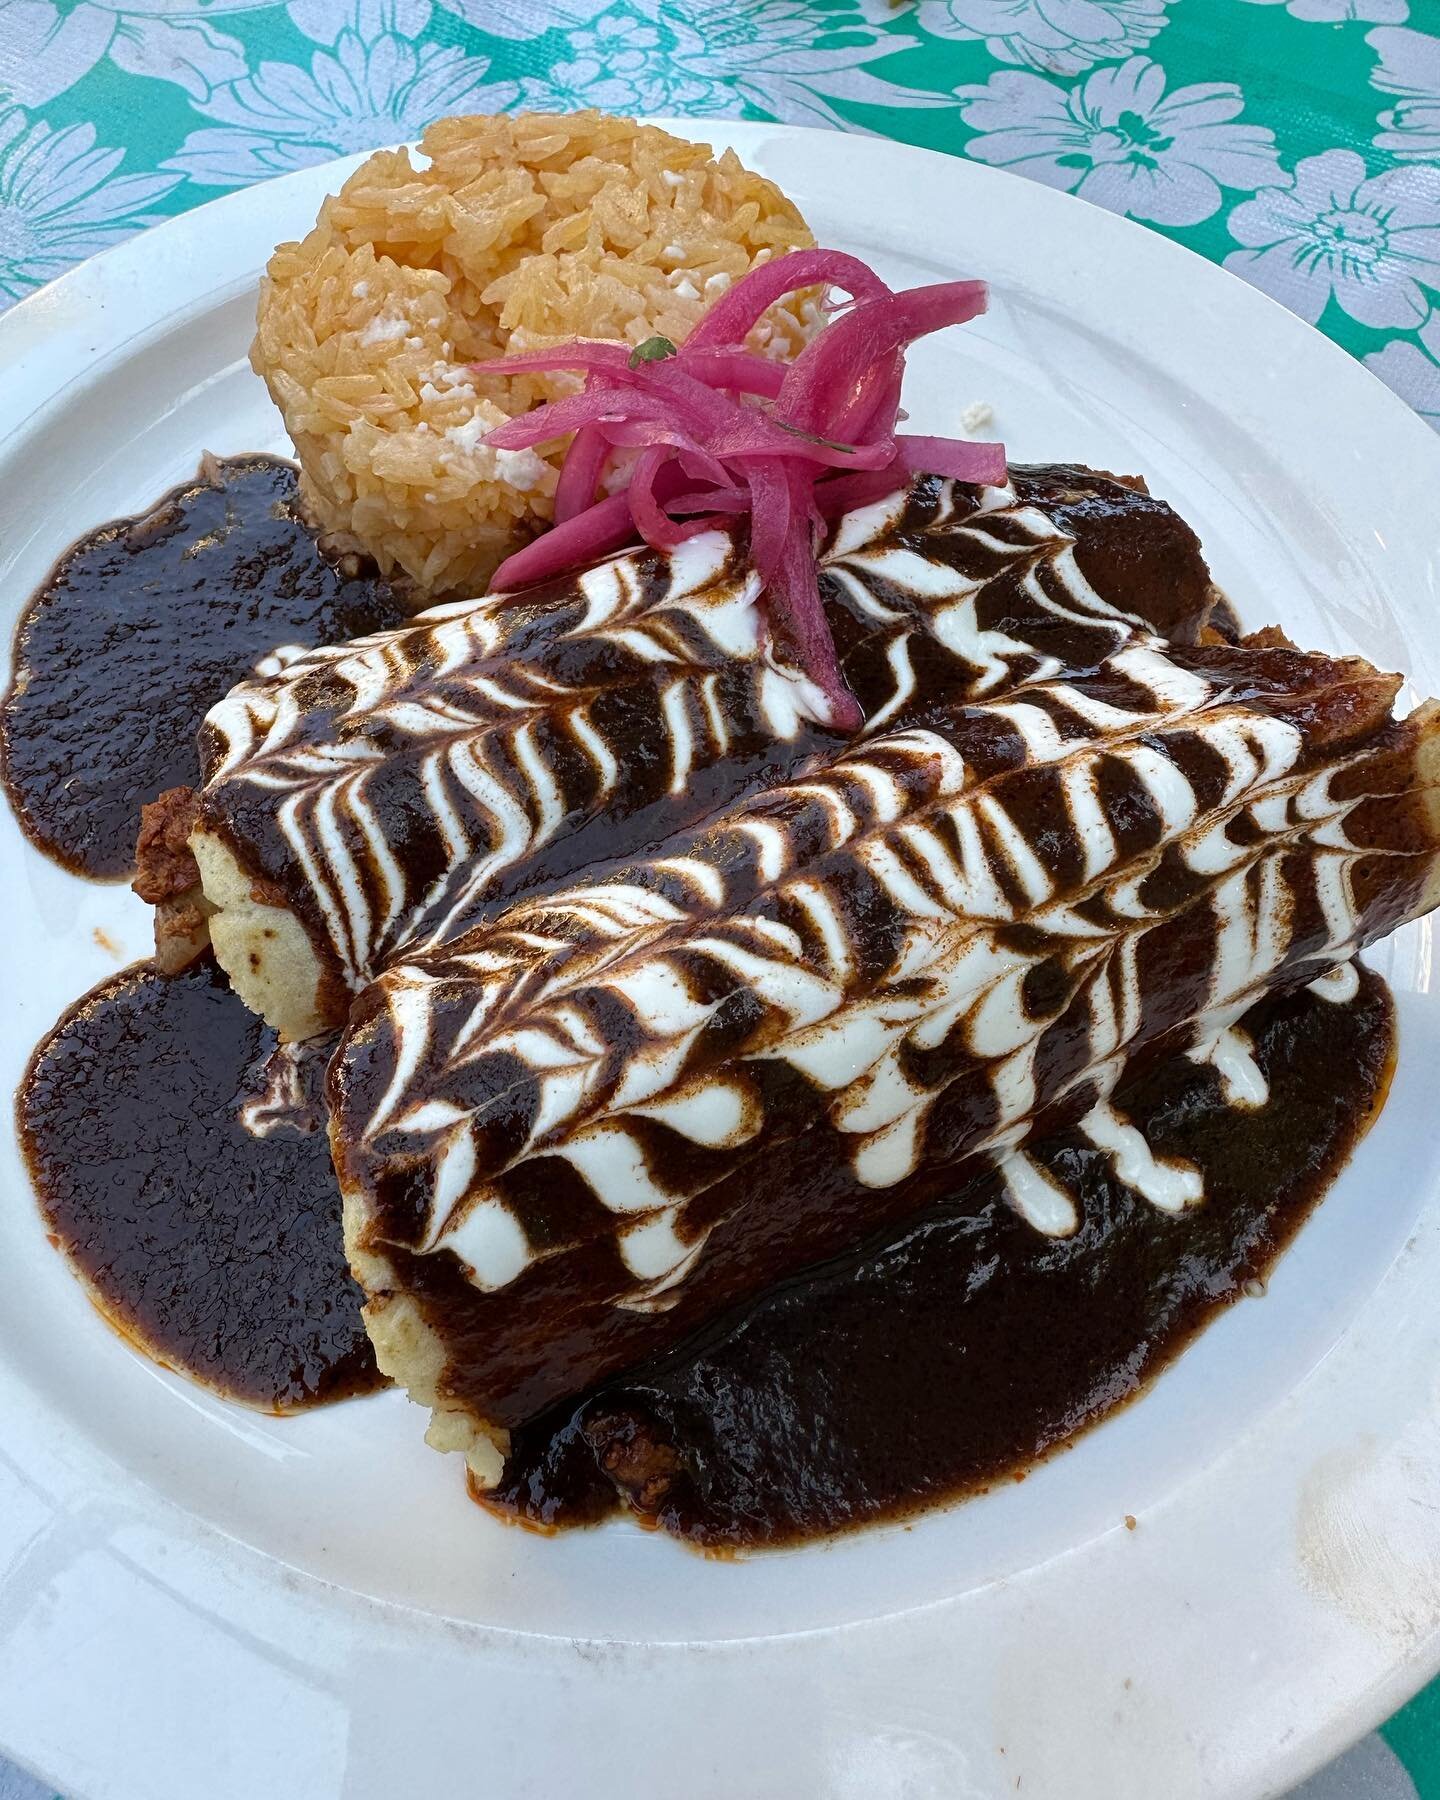 Our trip to Oaxaca in April 2020 did not happen for obvious reasons. #covid  I&rsquo;m thankful that we can find the delicious food of Oaxaca in San Francisco though. Finally checked out @donaji_tamalitos and it did not disappoint! And hopefully, one